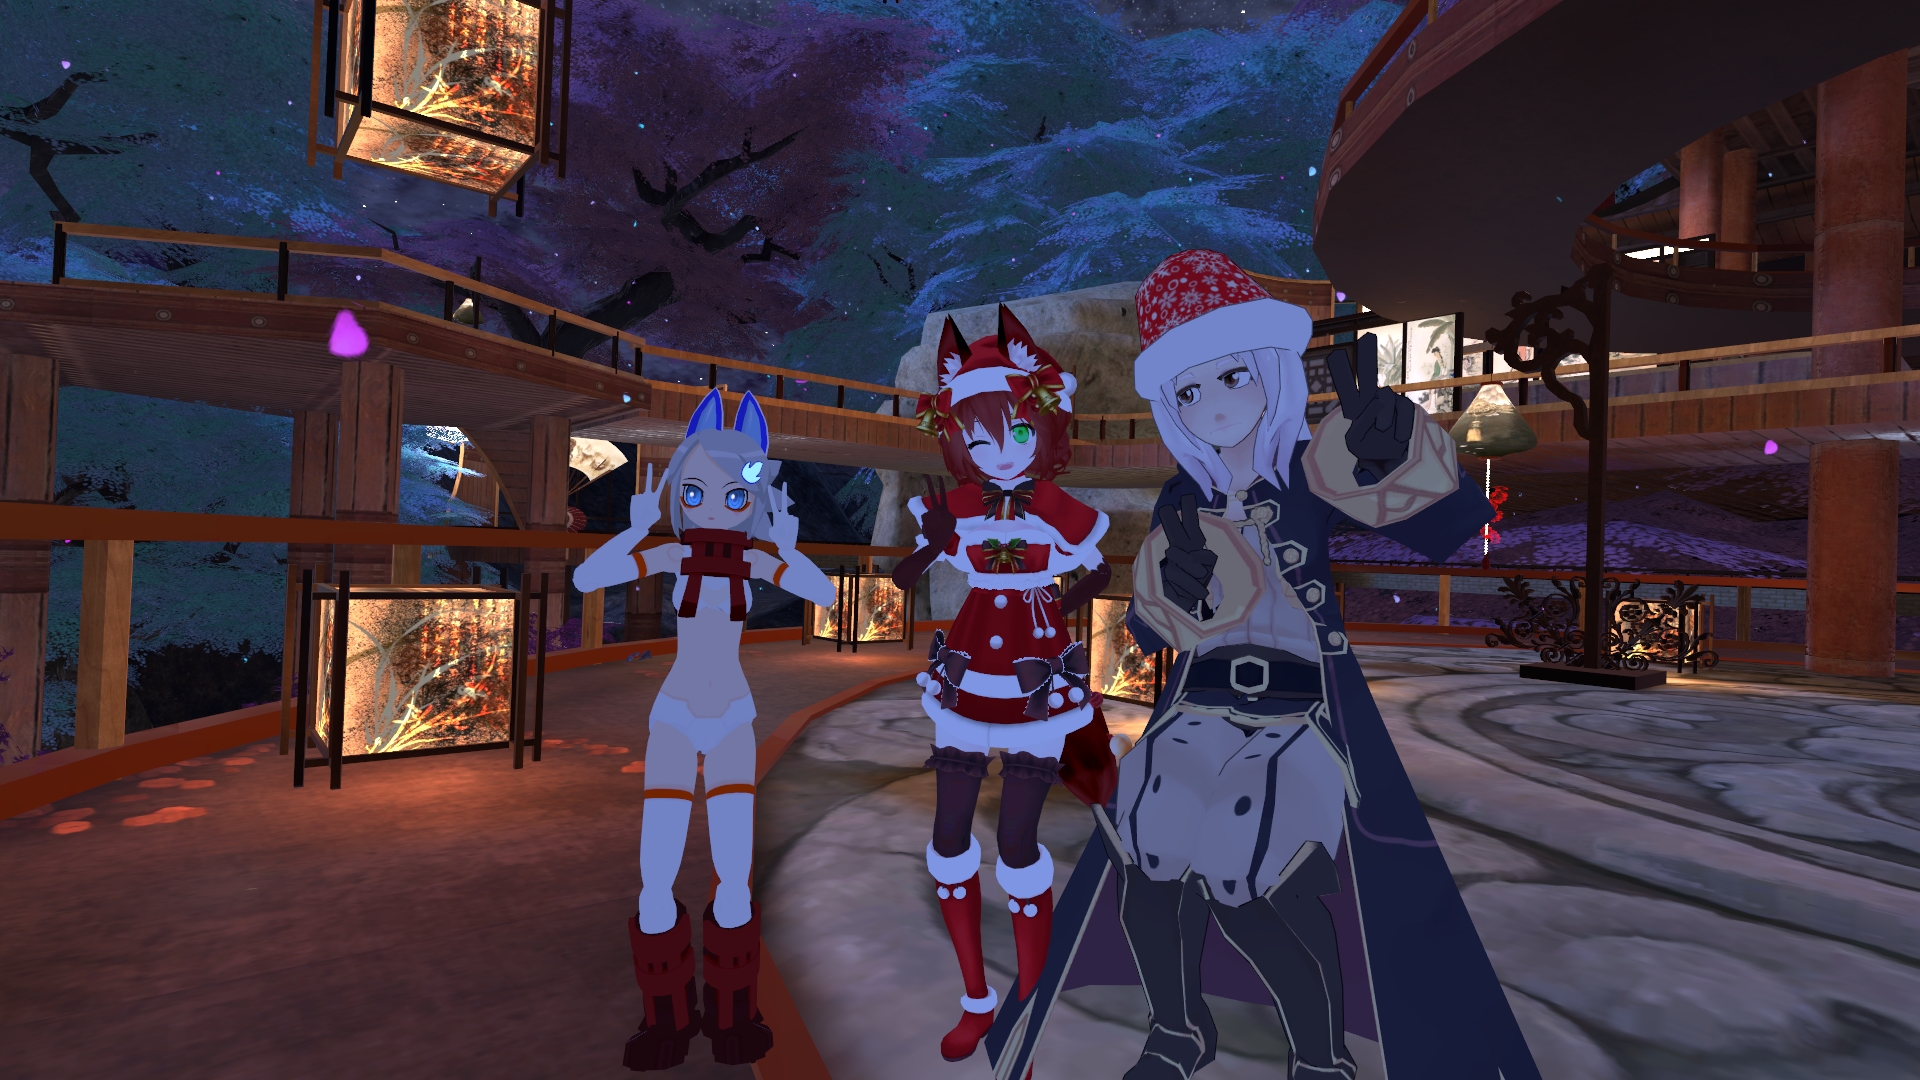 One of the rare times I’m able to hang out with Nighthawk in VRchat. 